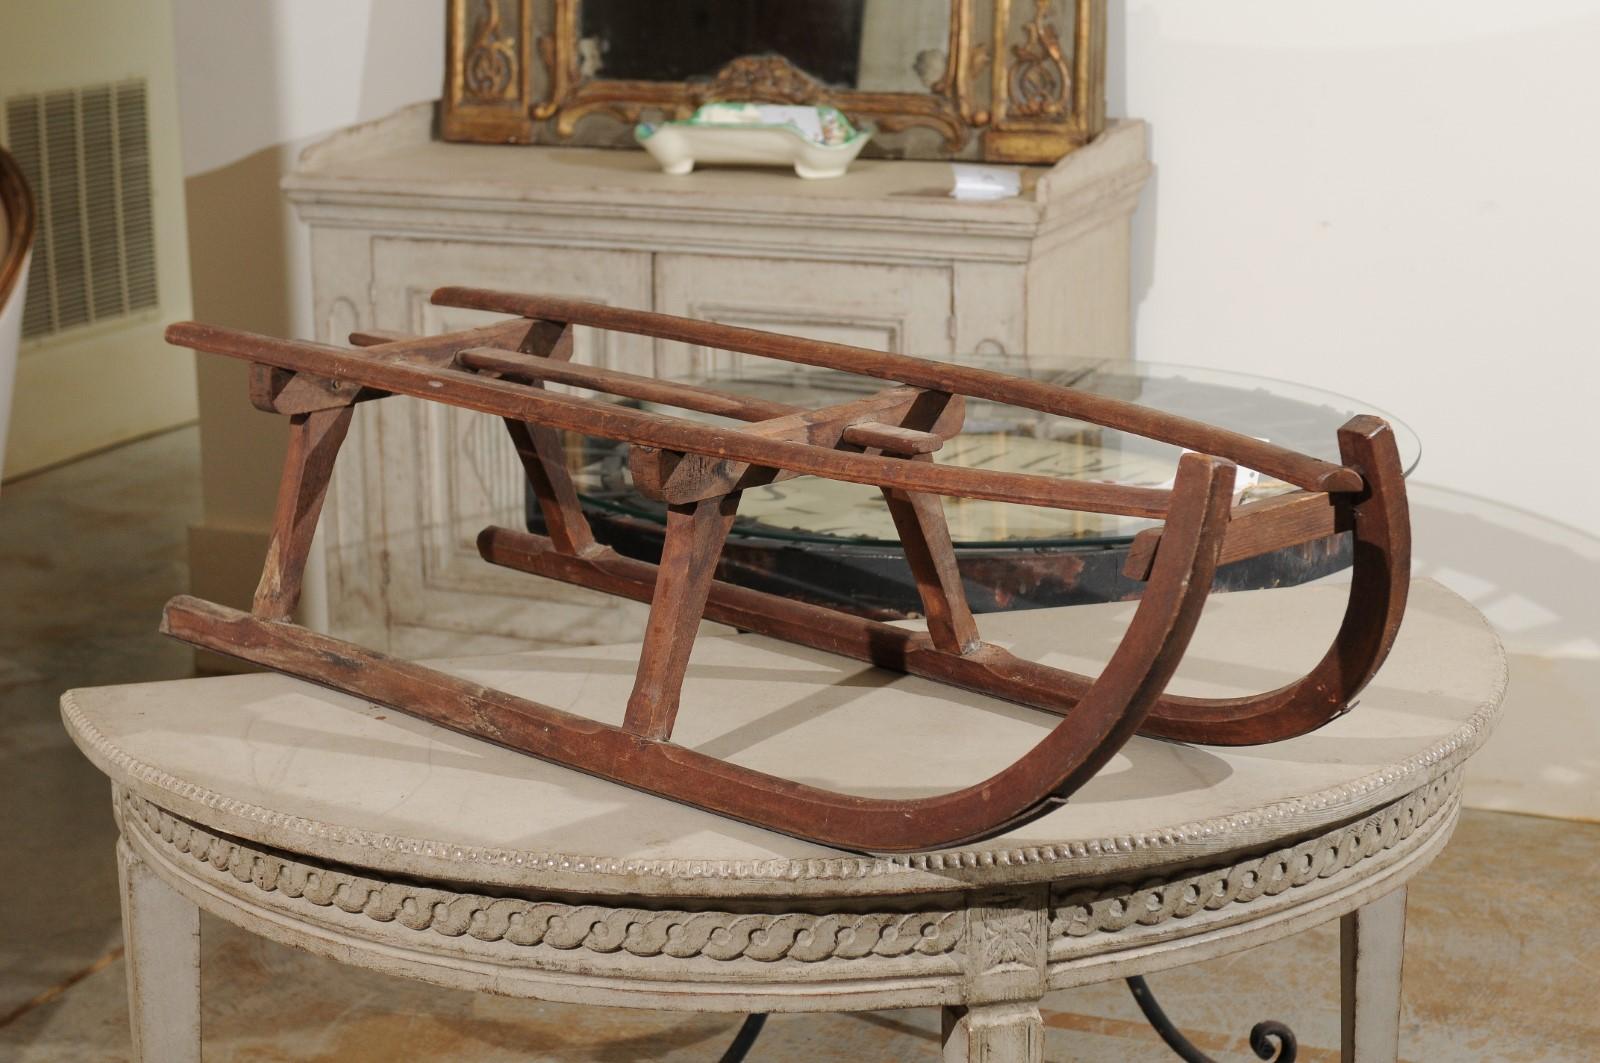 A French rustic wooden sled from the 19th century with curving extremities. Charming our eyes with its rustic appearance and nicely weathered patina, this French sled is made of simple wooden slats resting on trestles raised on a curving base, ideal